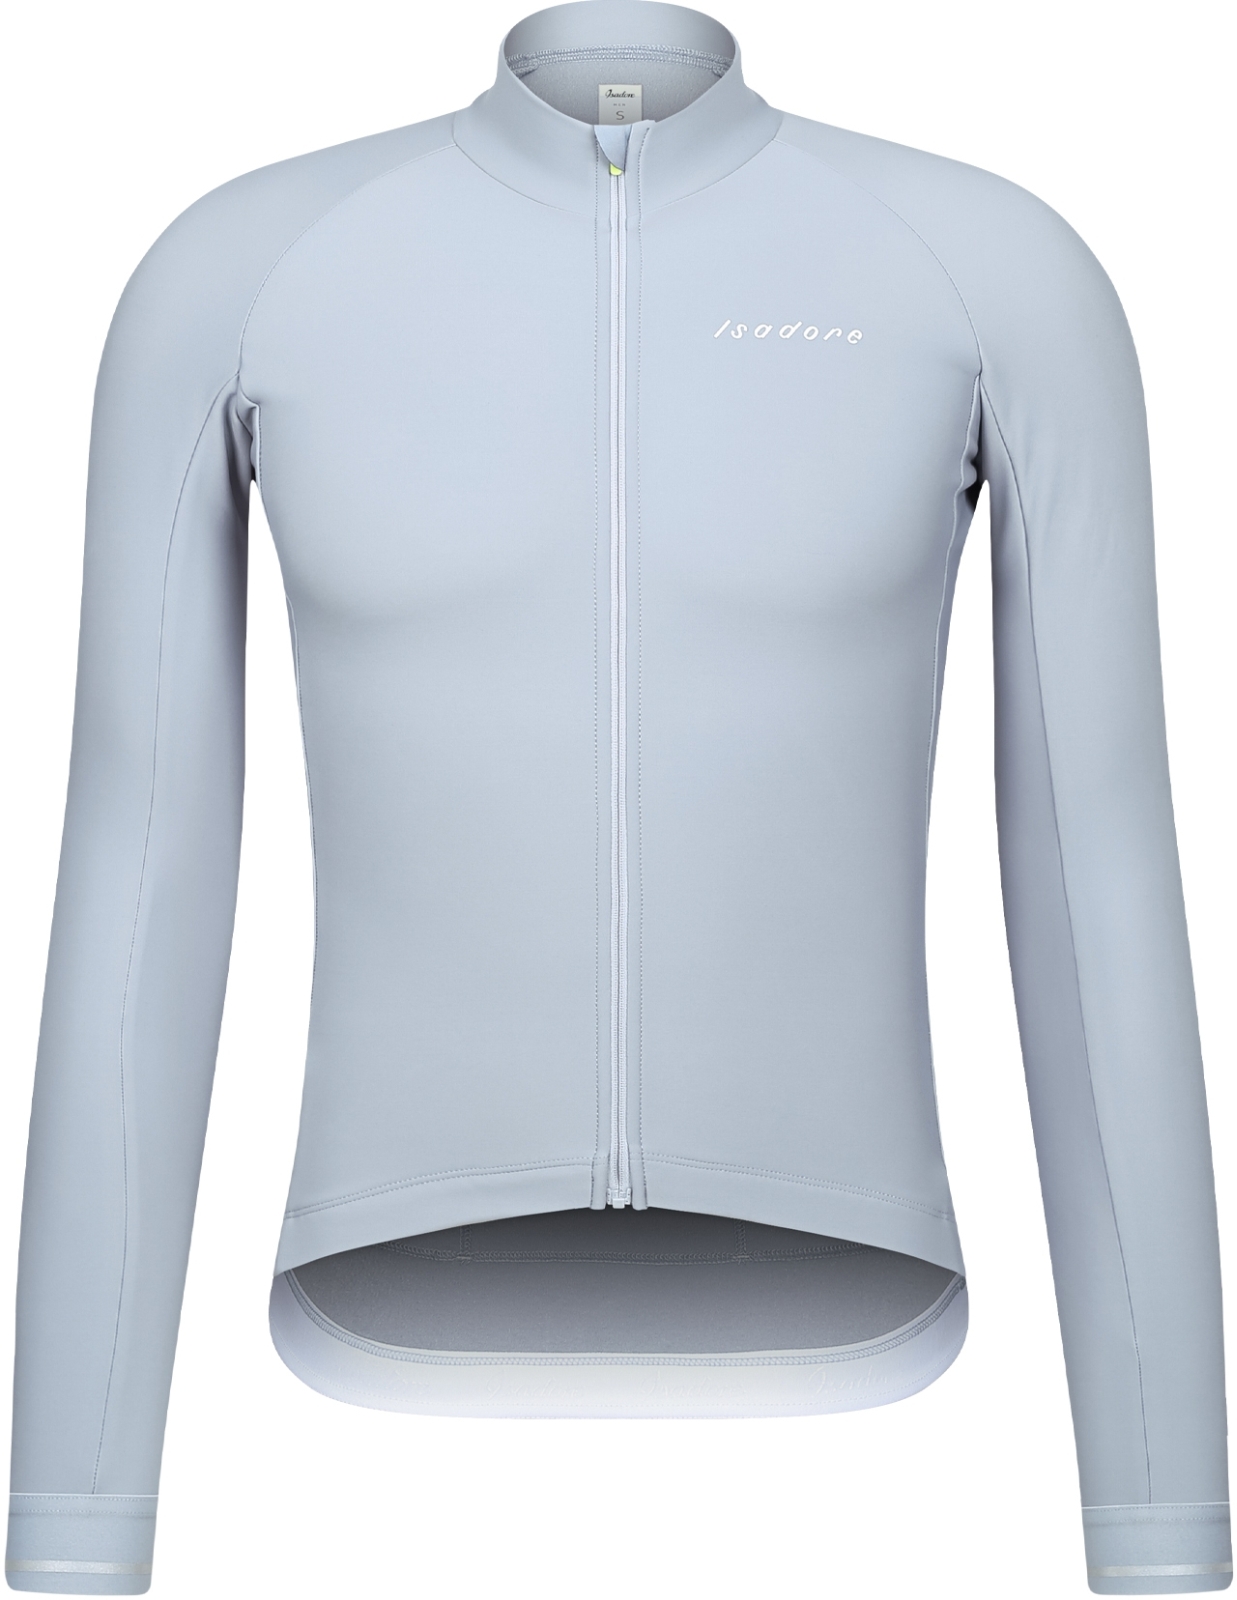 E-shop Isadore Debut Winter Long Sleeve Jersey - Stone Grey L